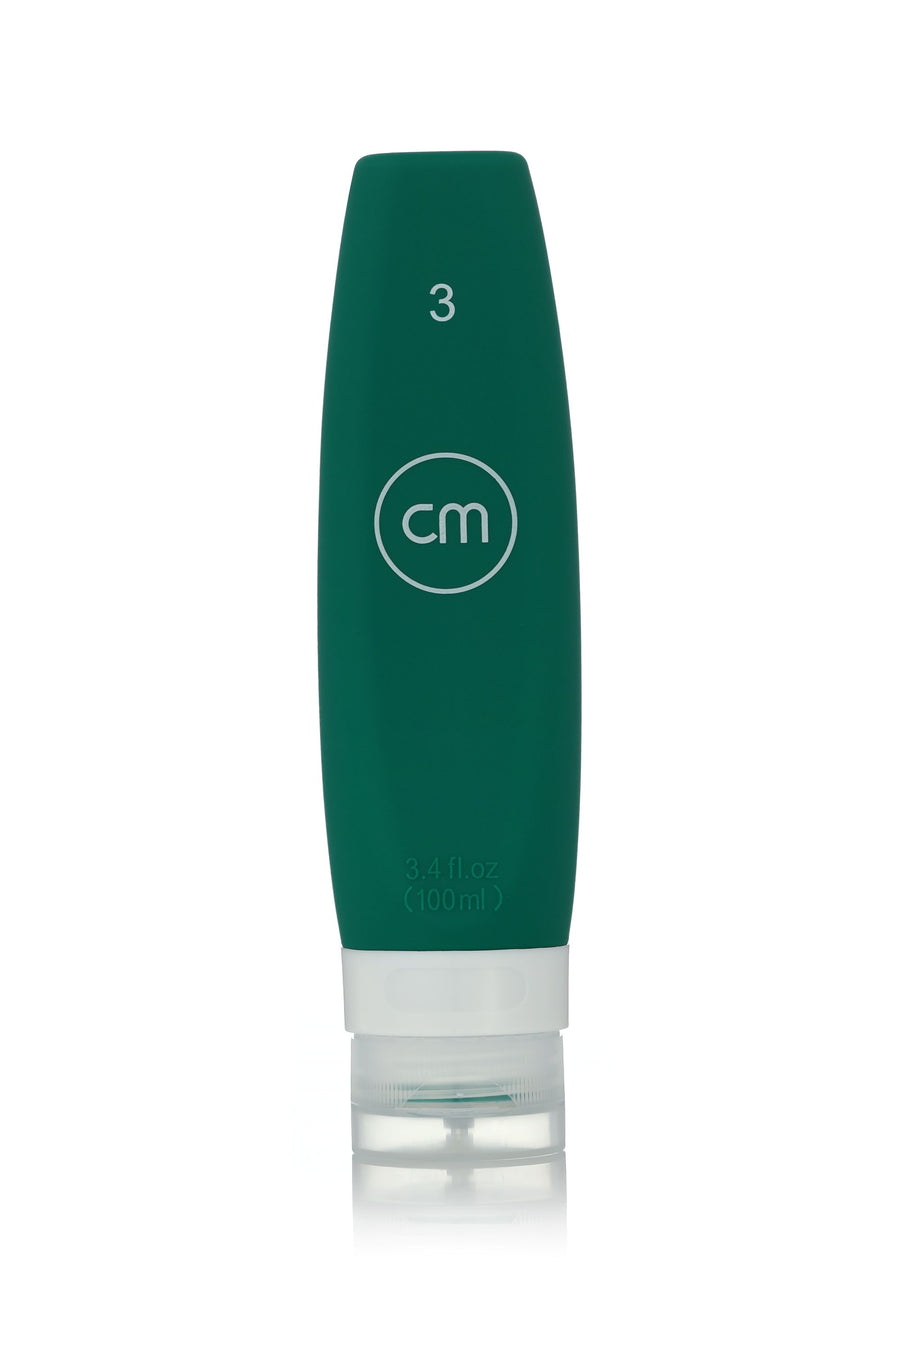 CurlMix Travel Silicone Bottles (4) for Curly Hair 3